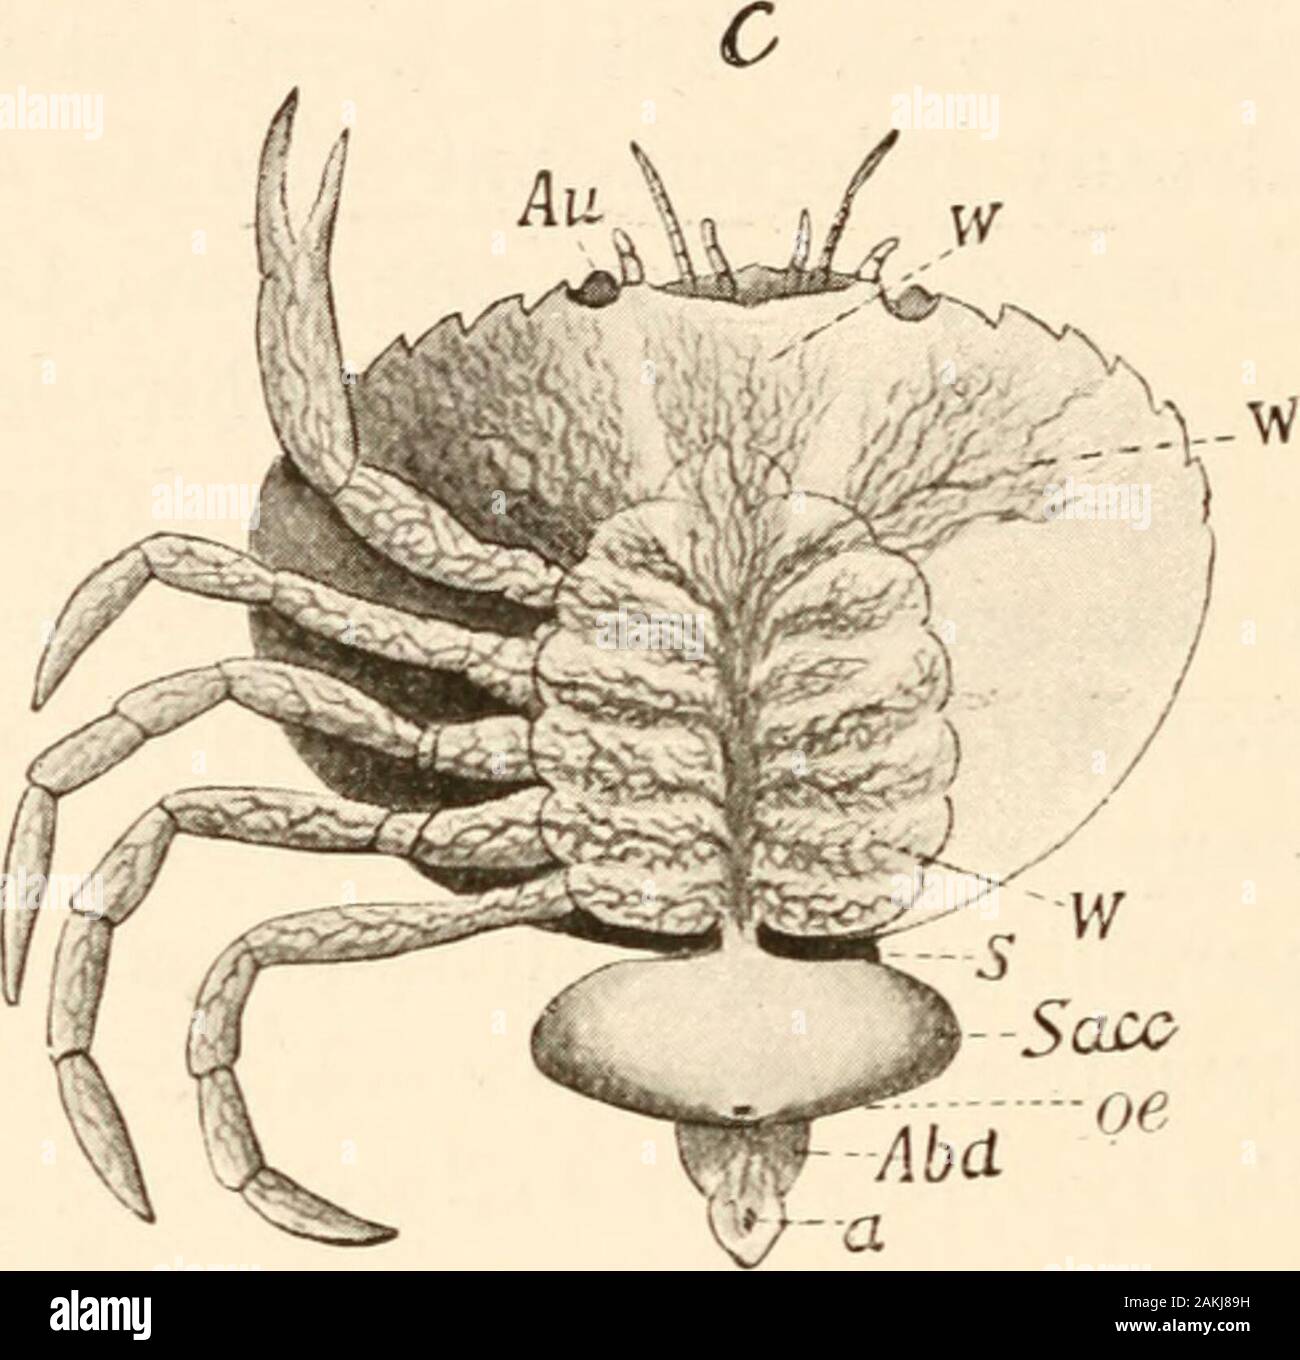 The evolution theory . Abd Fig. 112. Development of the parasitic Crustacean Sacculina carcini, afterDelage. A, Nauplius stage. Au, eye. I, II, III, the three pairs of appendages.B, Cypris-stage. VI-^I, the swimming appendages. C, mature animal {Sacc),attached to its host, the shore-crab {Carcinus mcenas), with a feltwork of fineroot-processes enveloping the crabs viscera, s, stalk. Sacc, body of theparasite, oe, aperture of the brood-cavit}. Abd, abdomen of the crab withthe anus (a), into the singular creature which we now see in the sexually matureform. The same is the case with the numerous Stock Photo